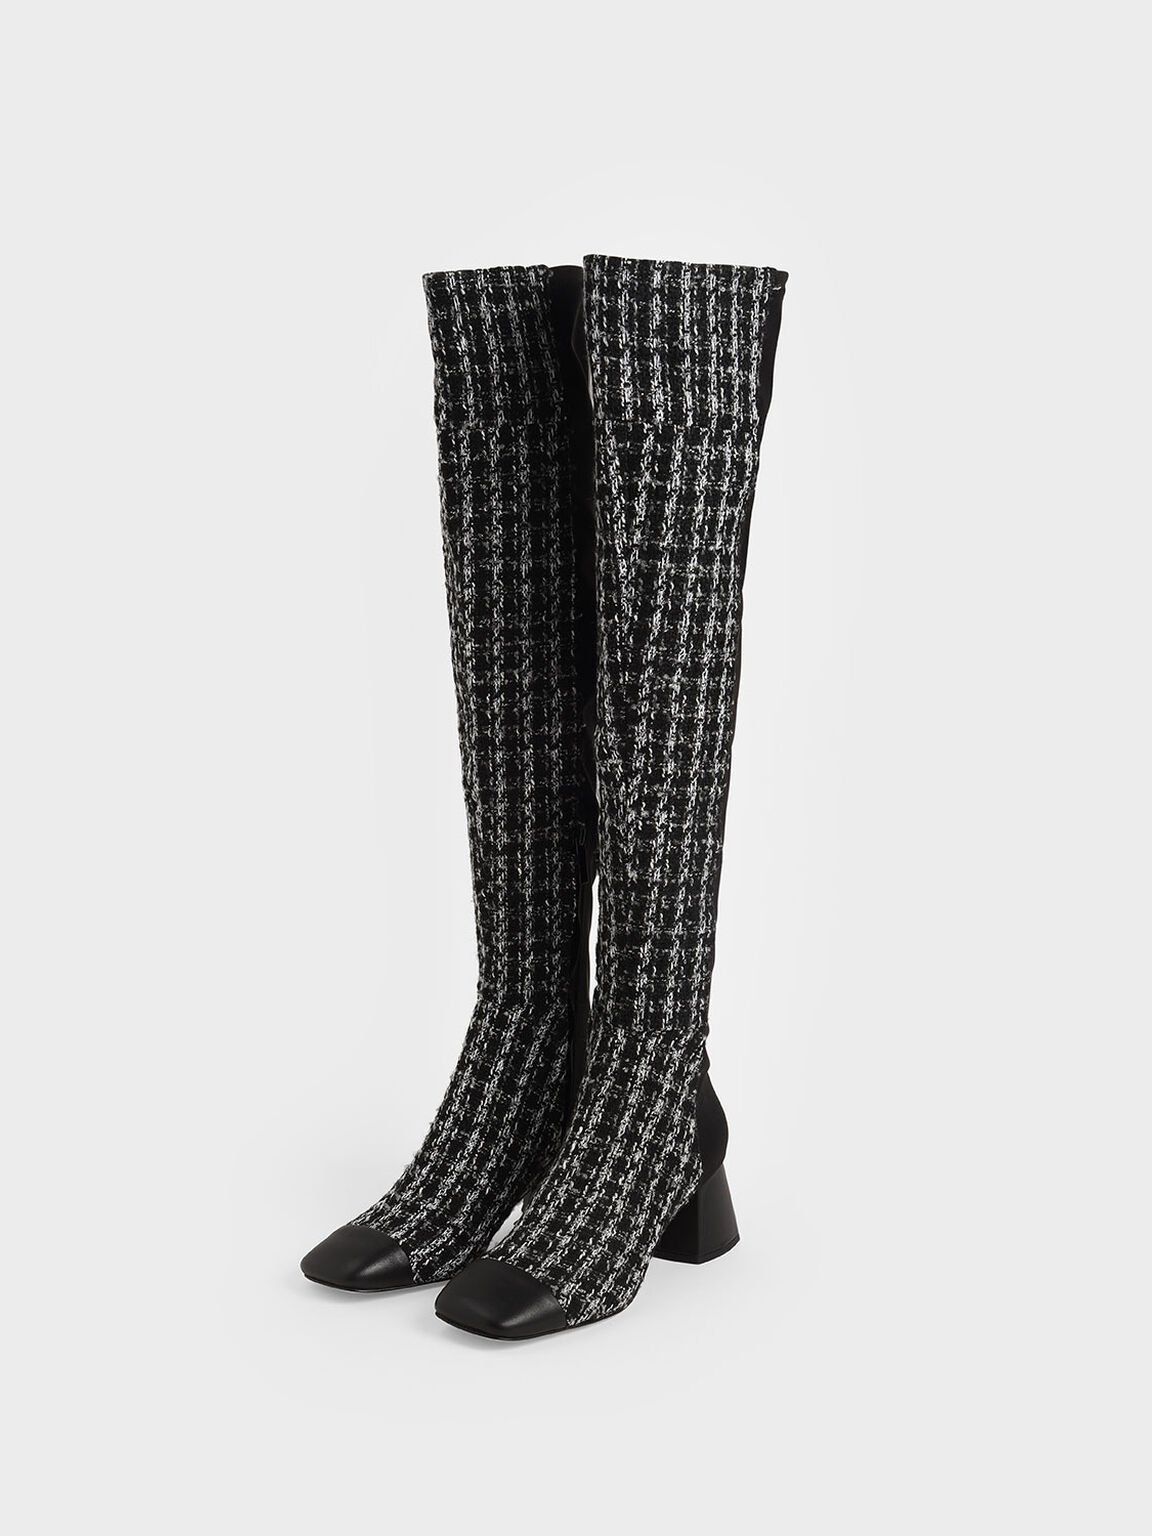 Tweed & Leather Thigh High Boots, Multi, hi-res